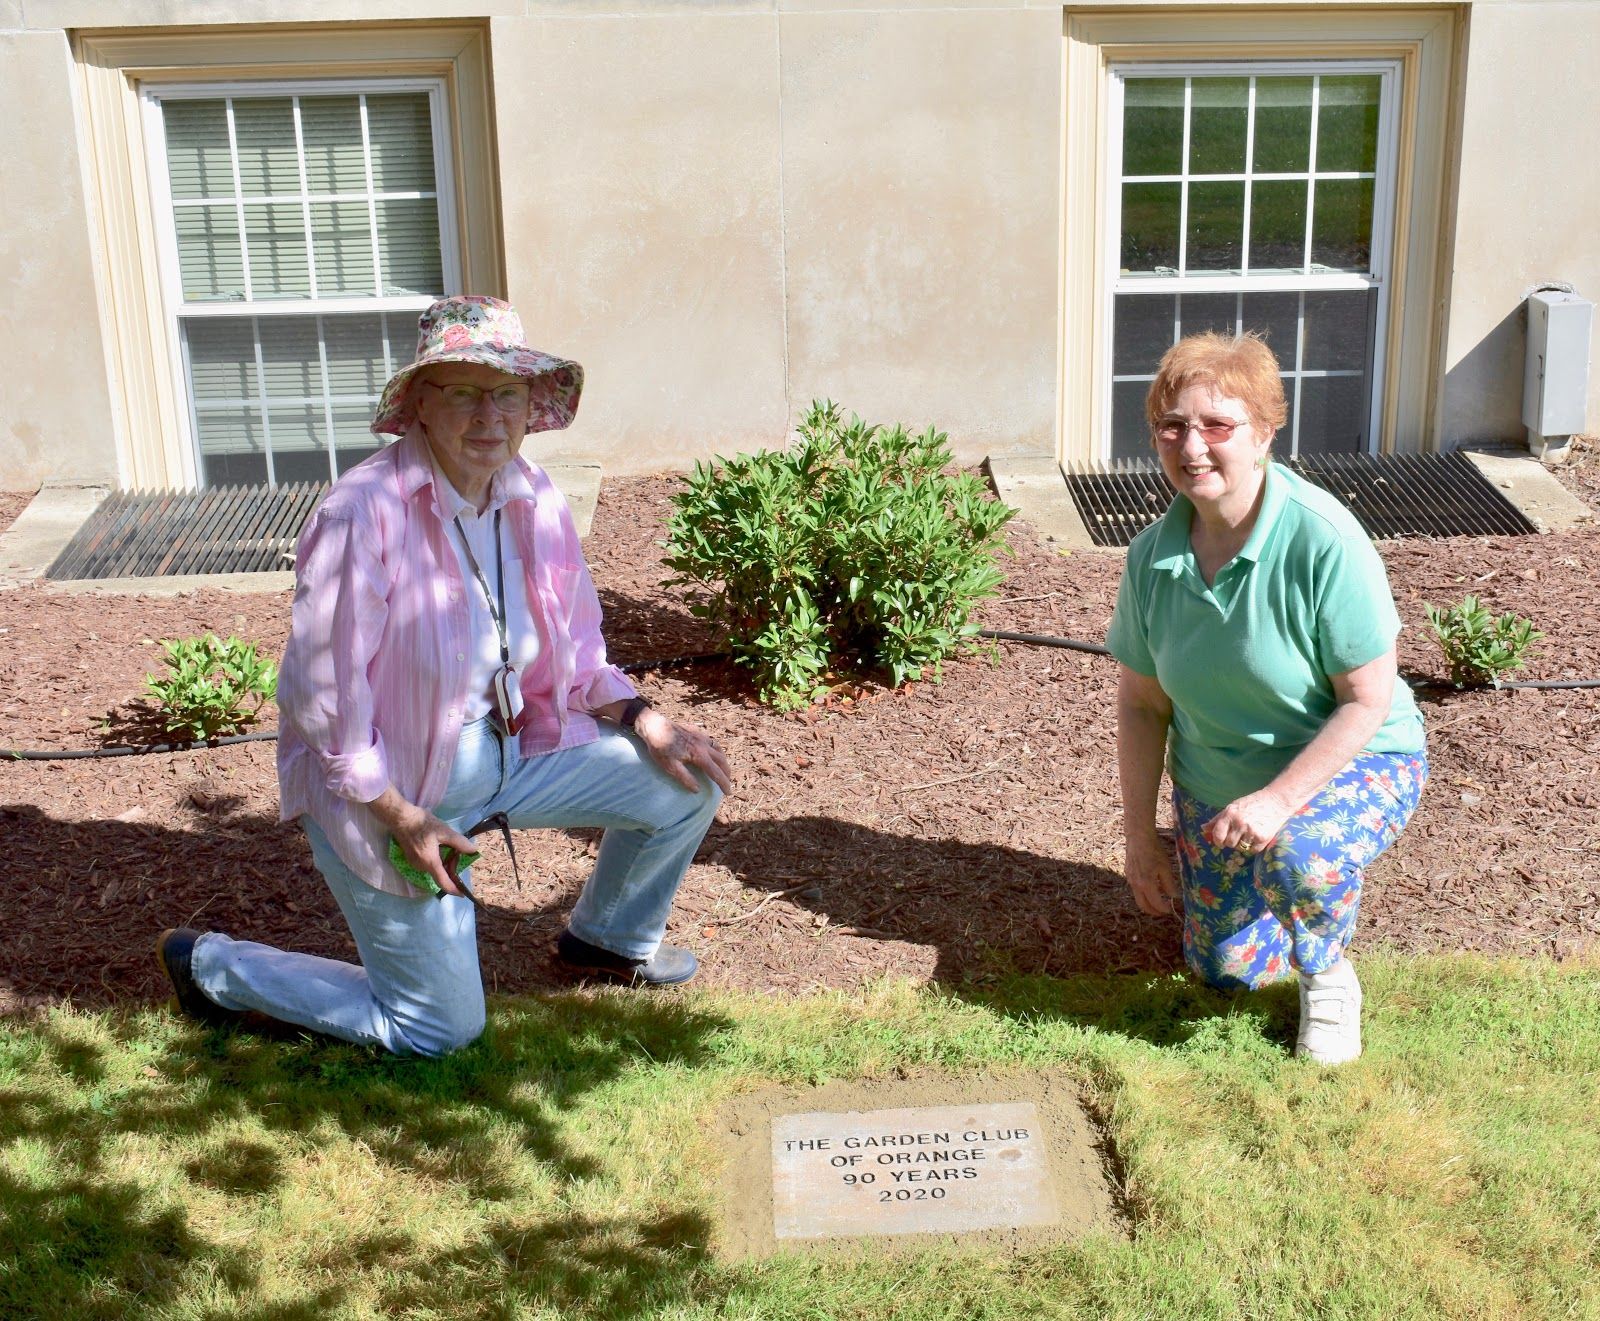 dedication of shrubs to the Town Hall_